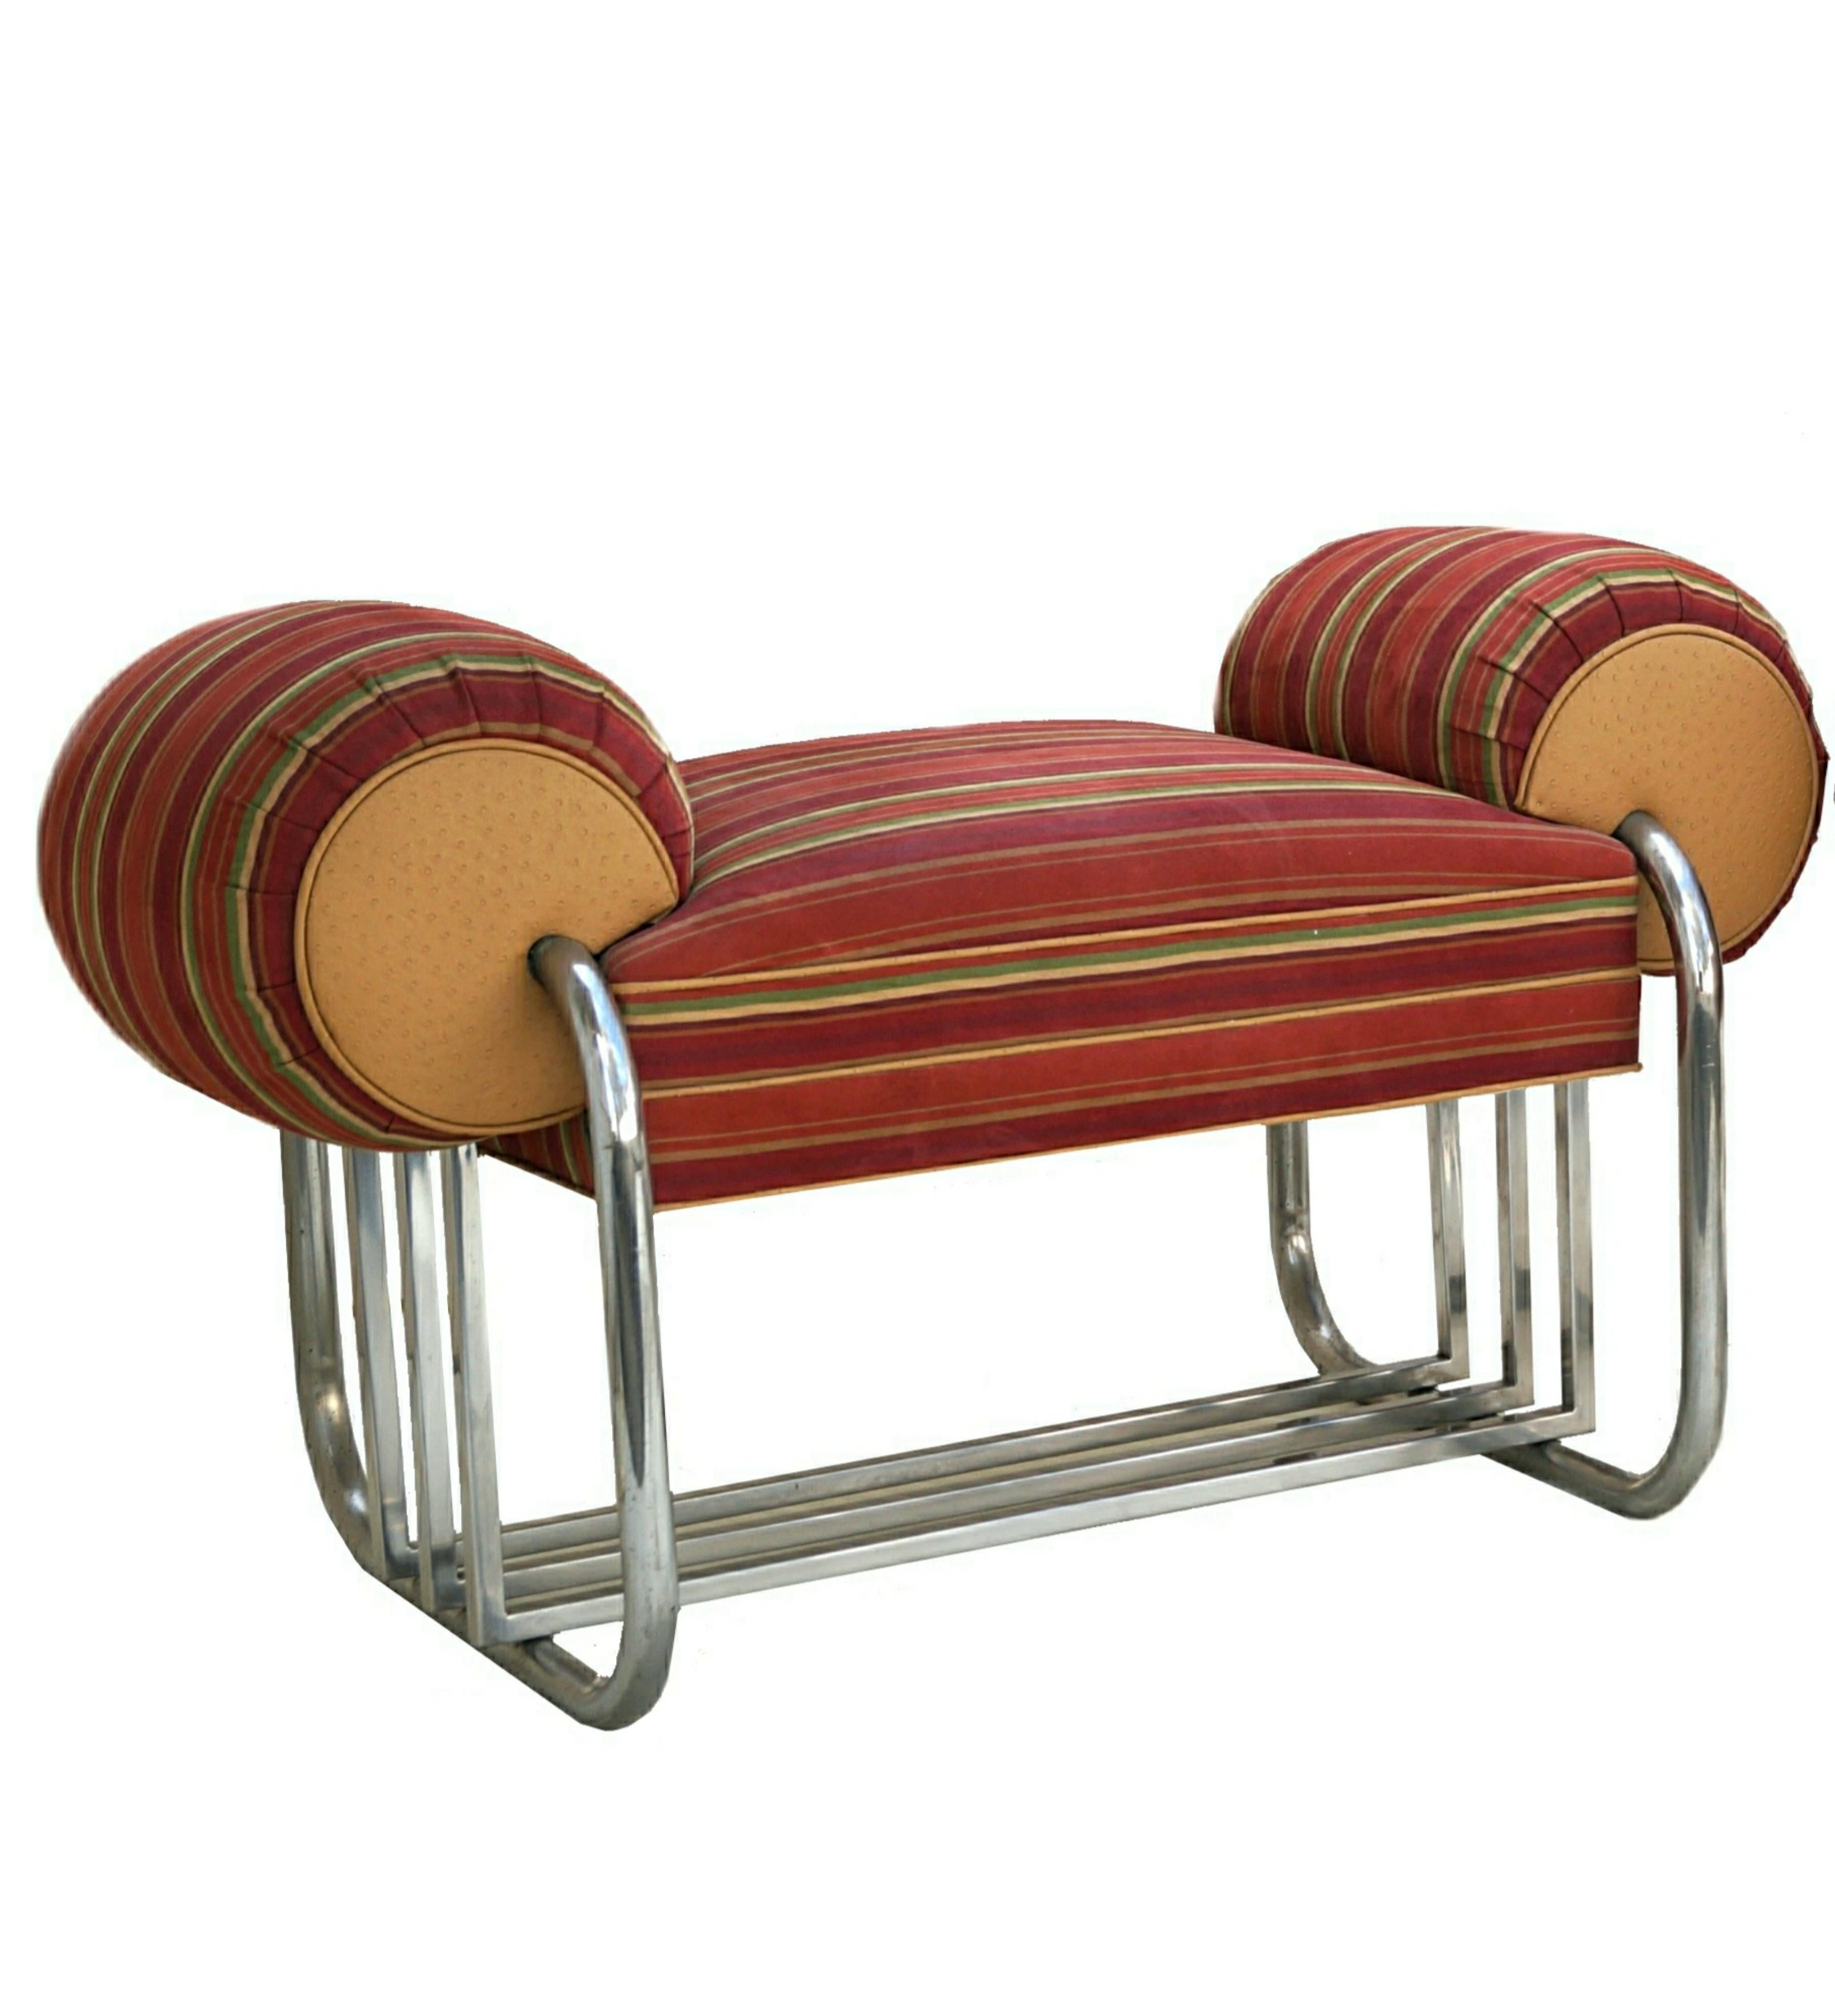 Pair of Art Deco Machine Age tubular chrome bench benches by Donald Deskey. These can be used indoors almost anywhere: entry, foot of a bed or as additional seating in any room / rooms.